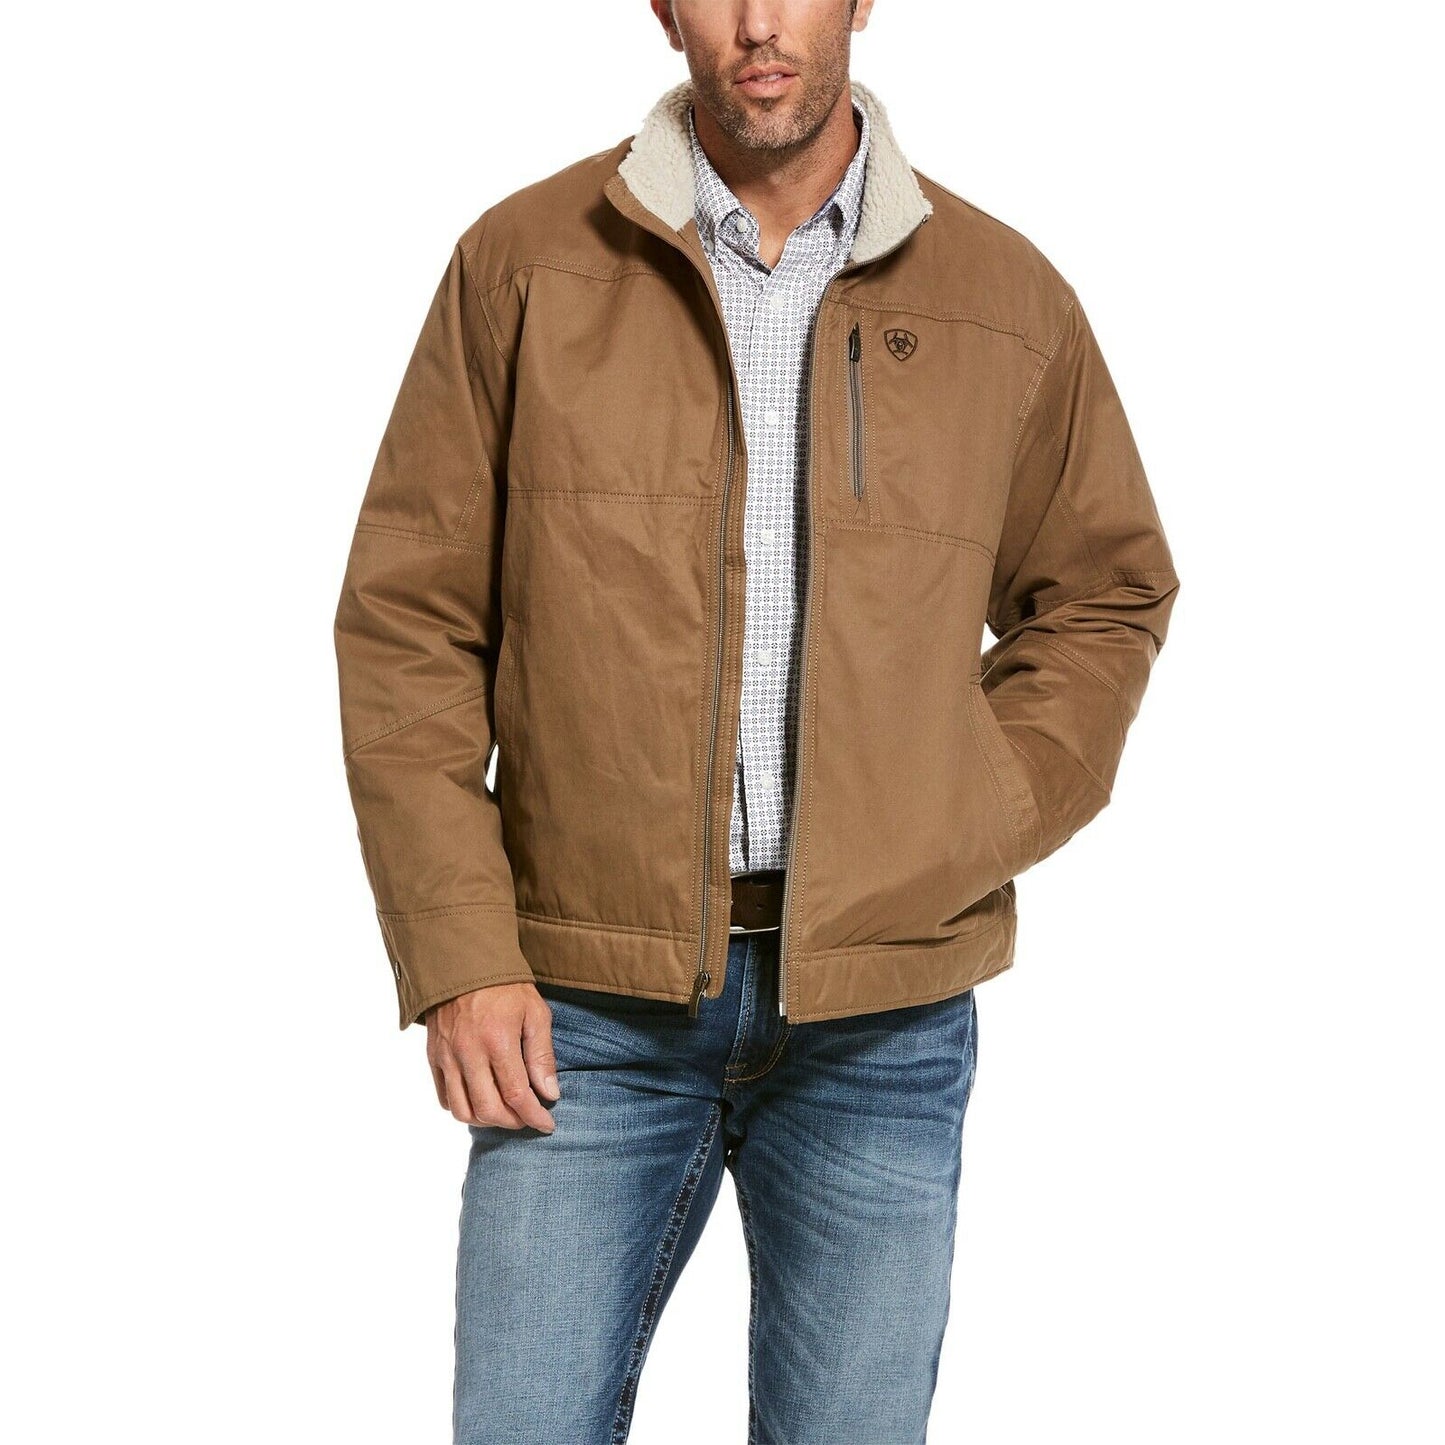 Ariat® Men's Grizzly Cub Brown Concealed Carry Canvas Jacket 10028399